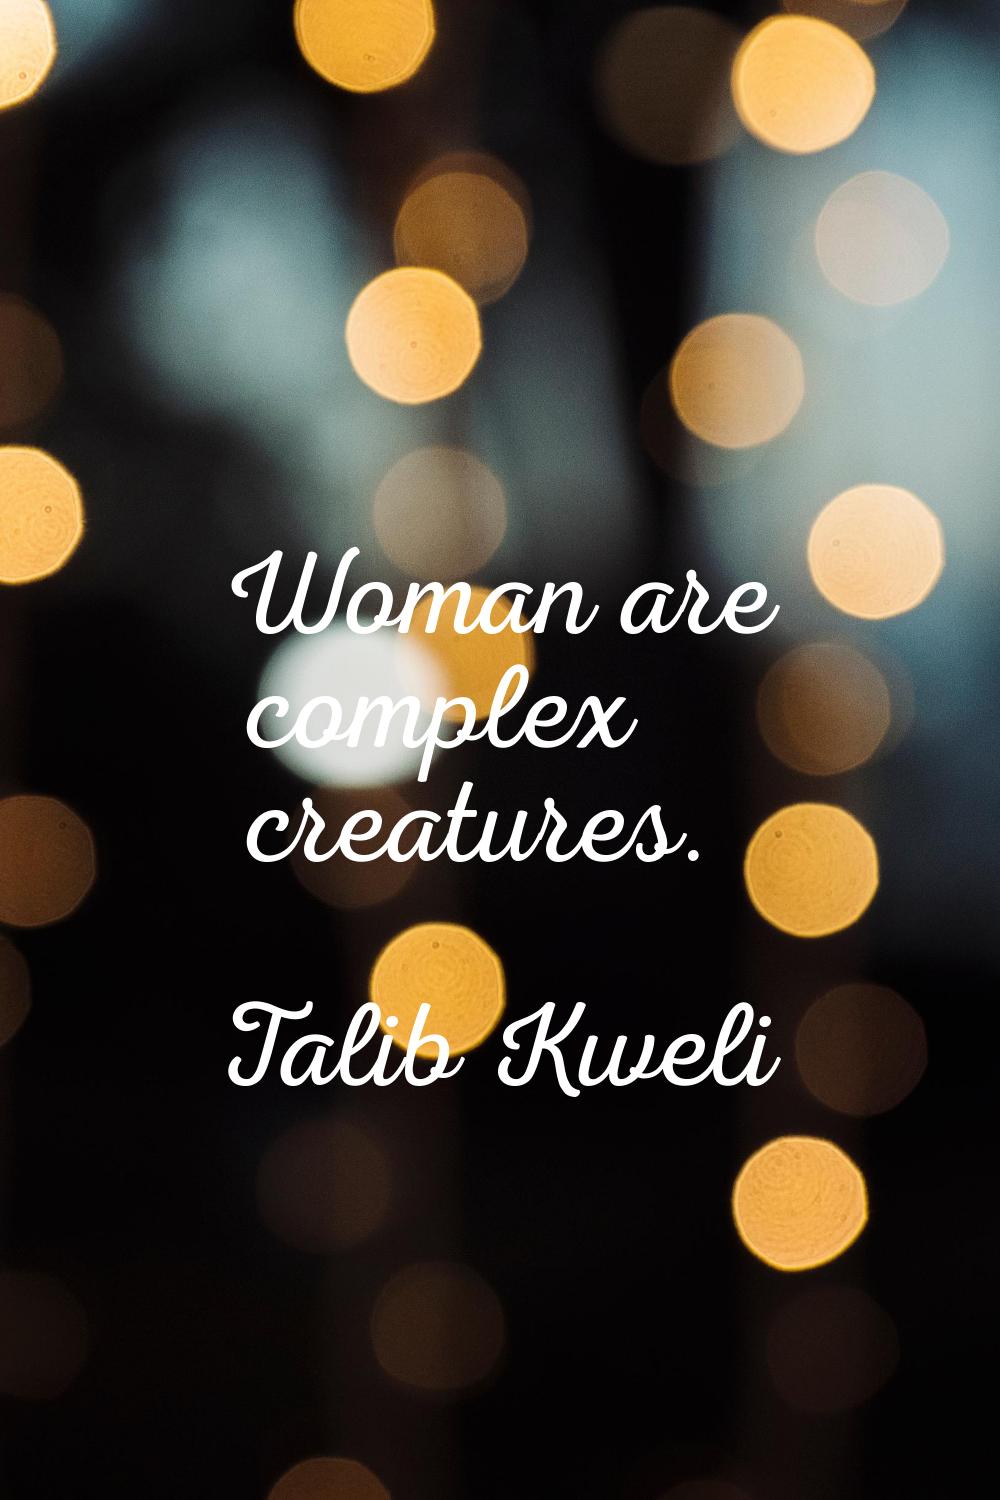 Woman are complex creatures.